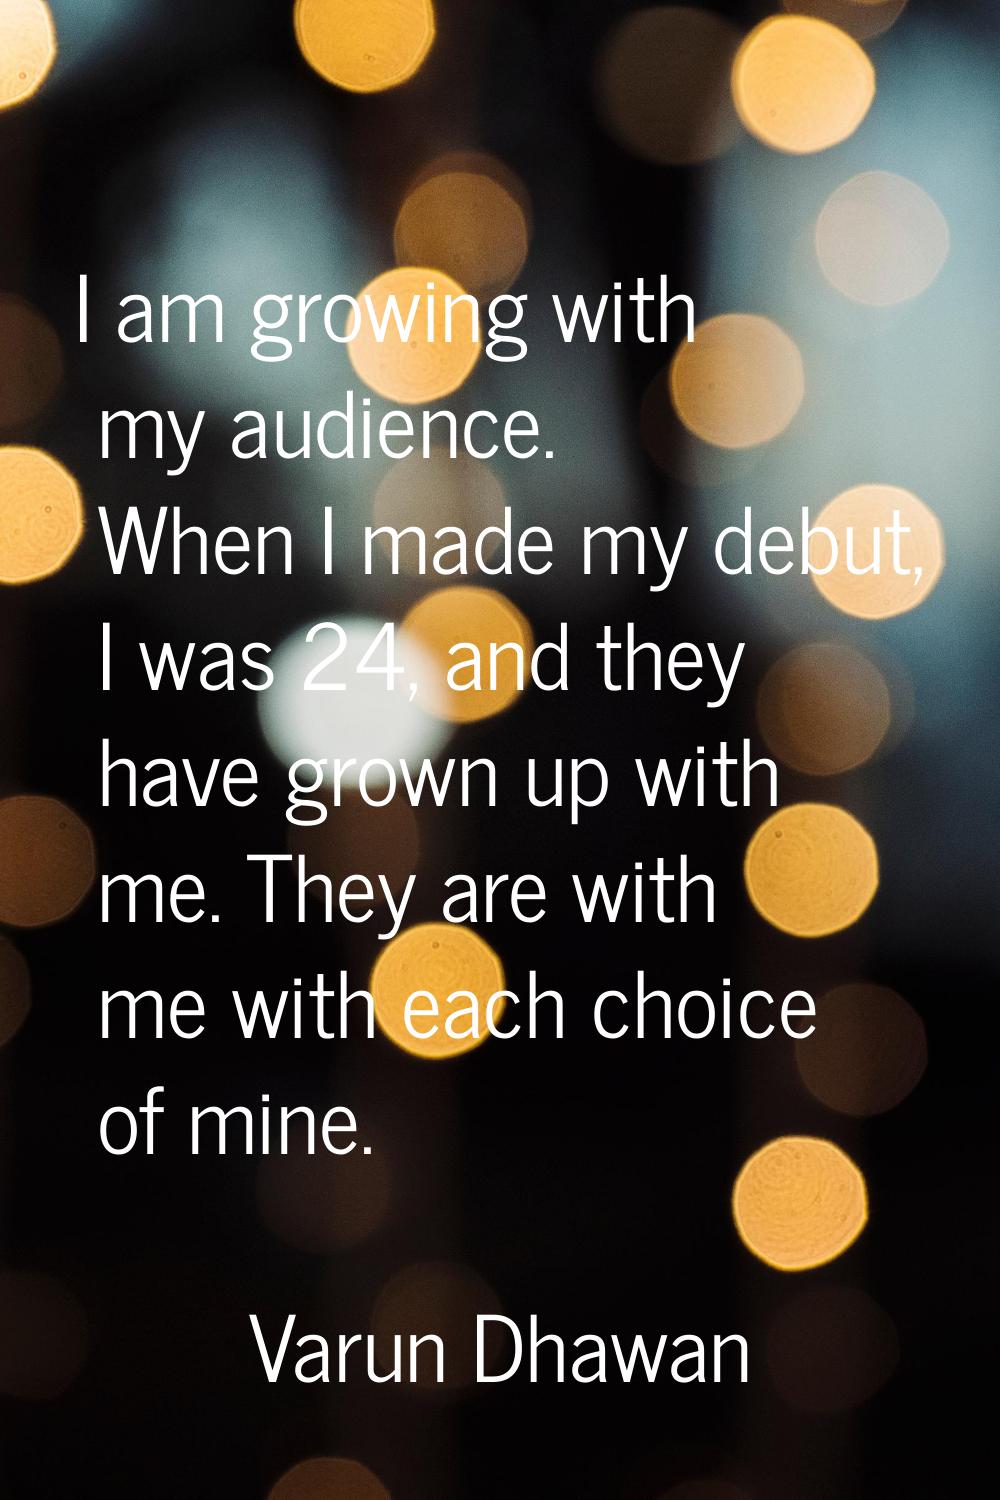 I am growing with my audience. When I made my debut, I was 24, and they have grown up with me. They